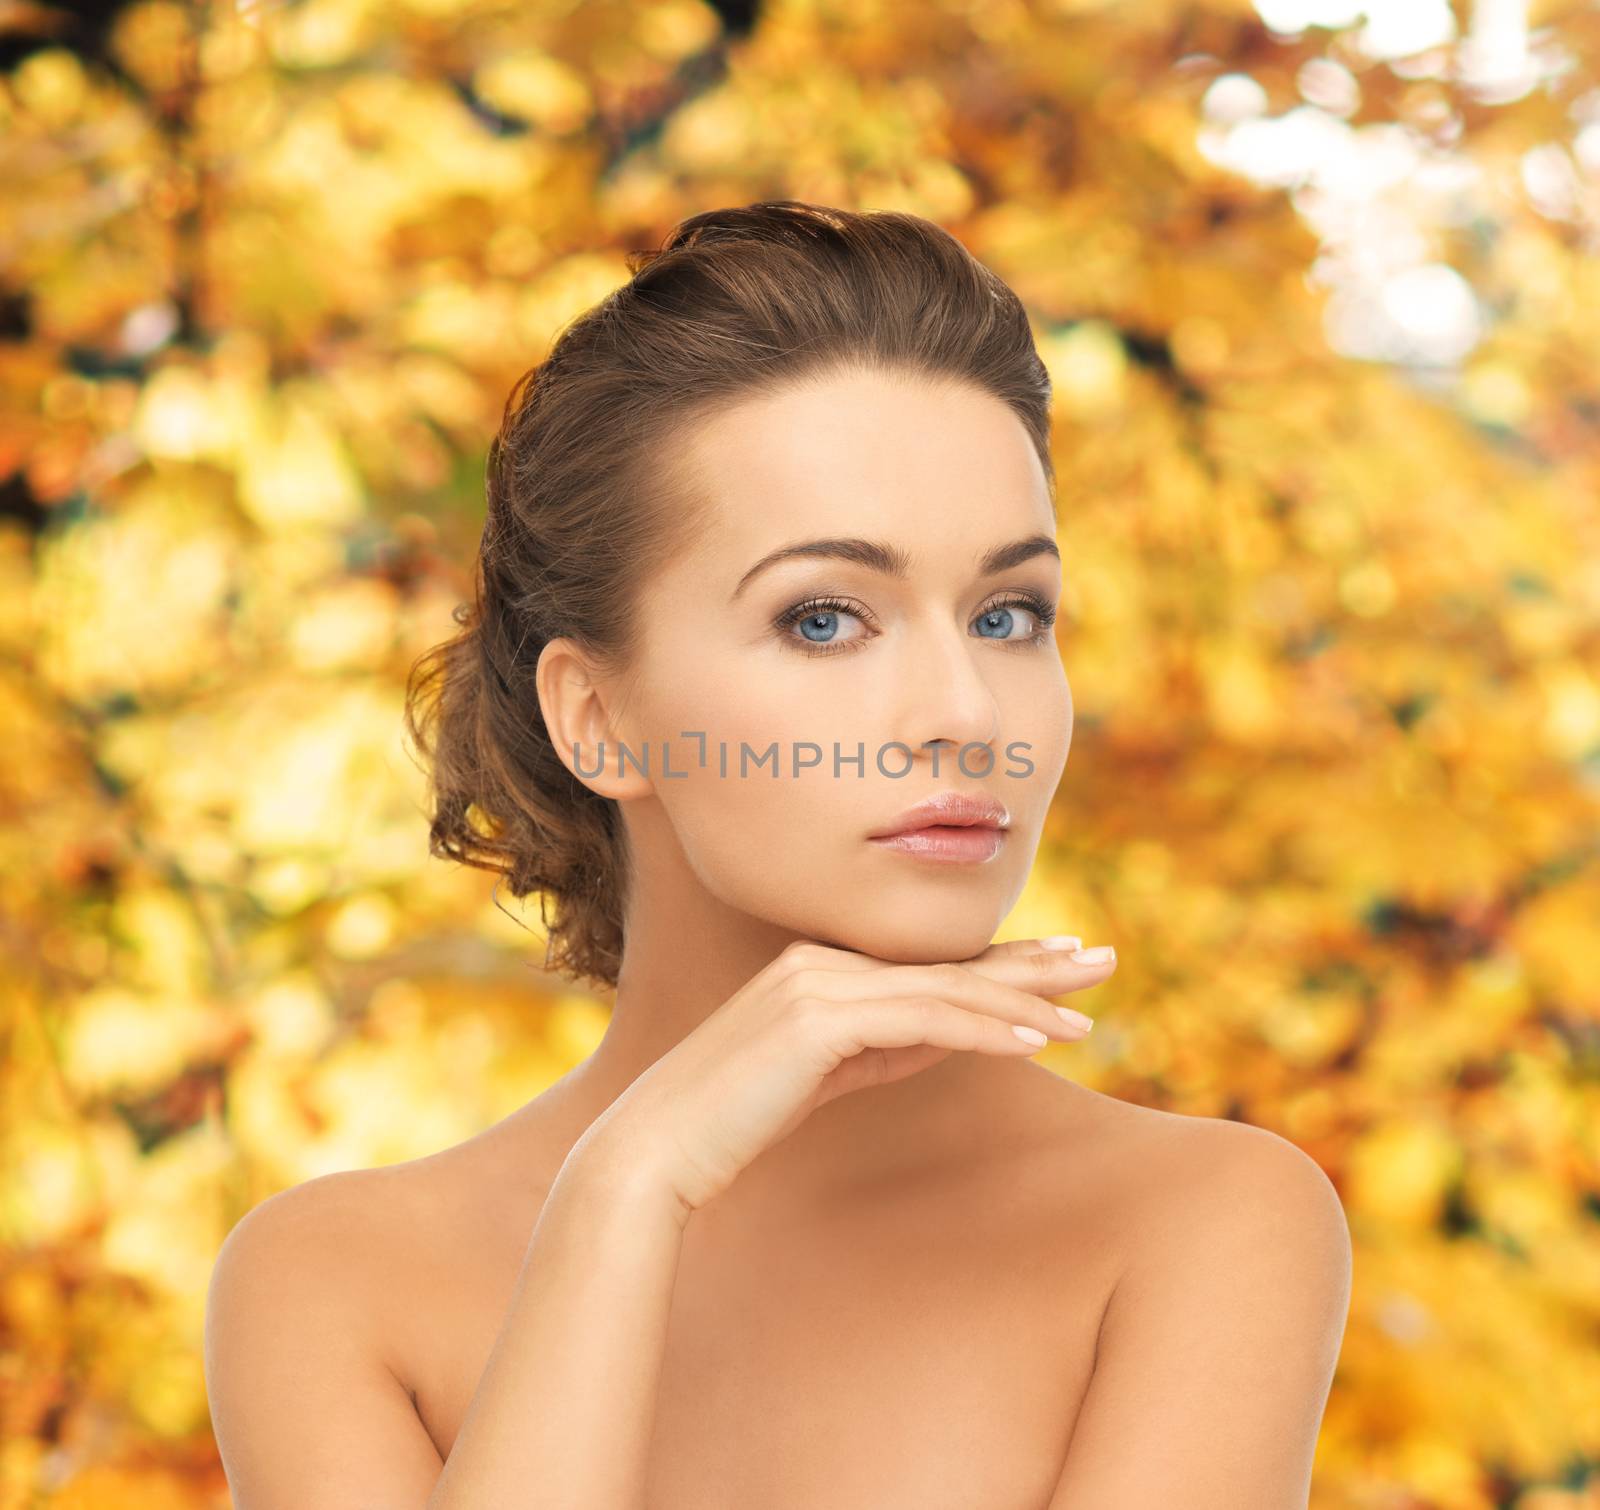 health and beauty concept - face and hands of beautiful woman with updo over yellow autumn leaves background